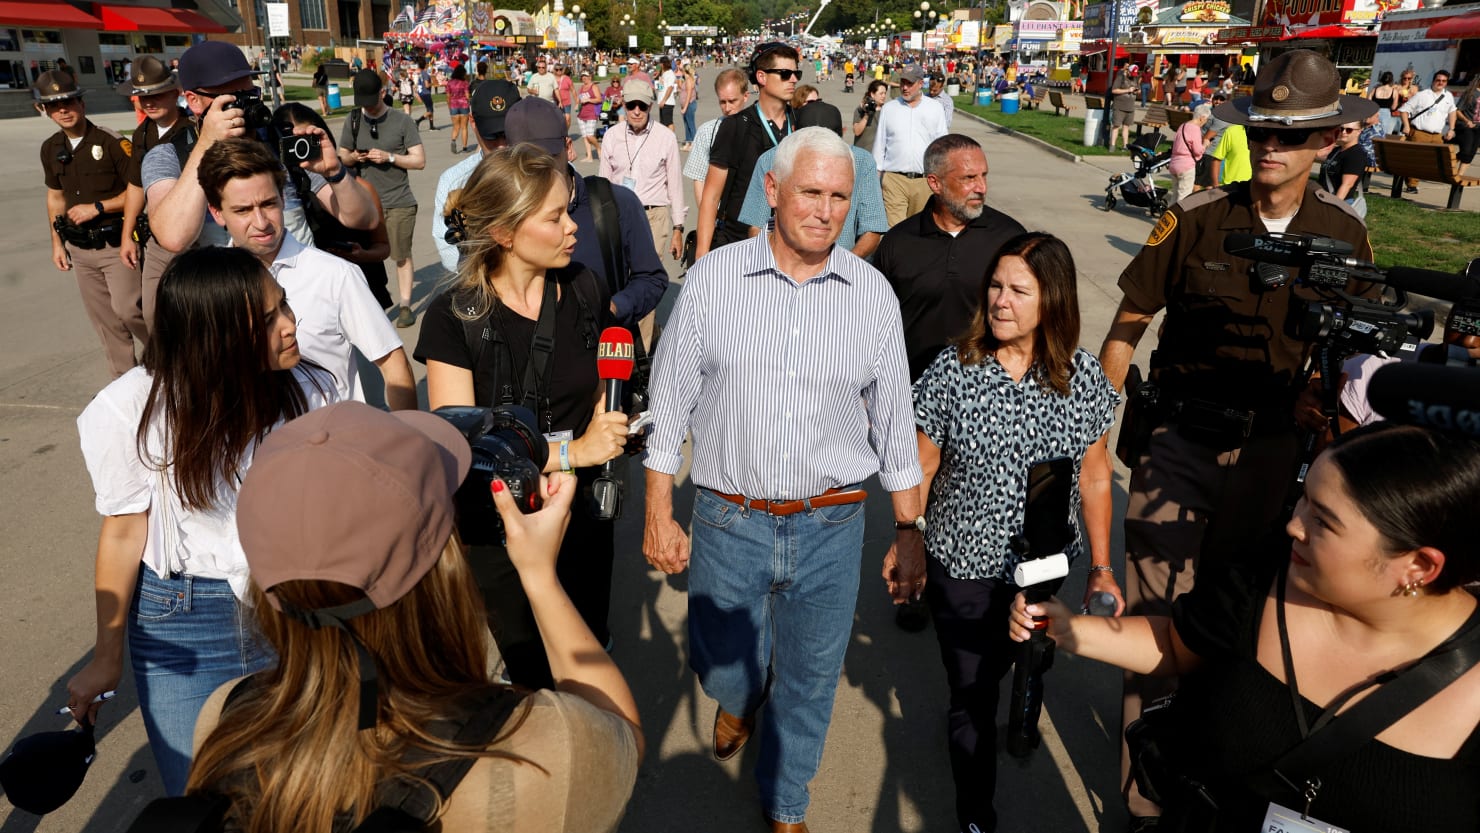 Mike Pence Repeatedly Heckled at Iowa State Fair: ‘Traitor!’